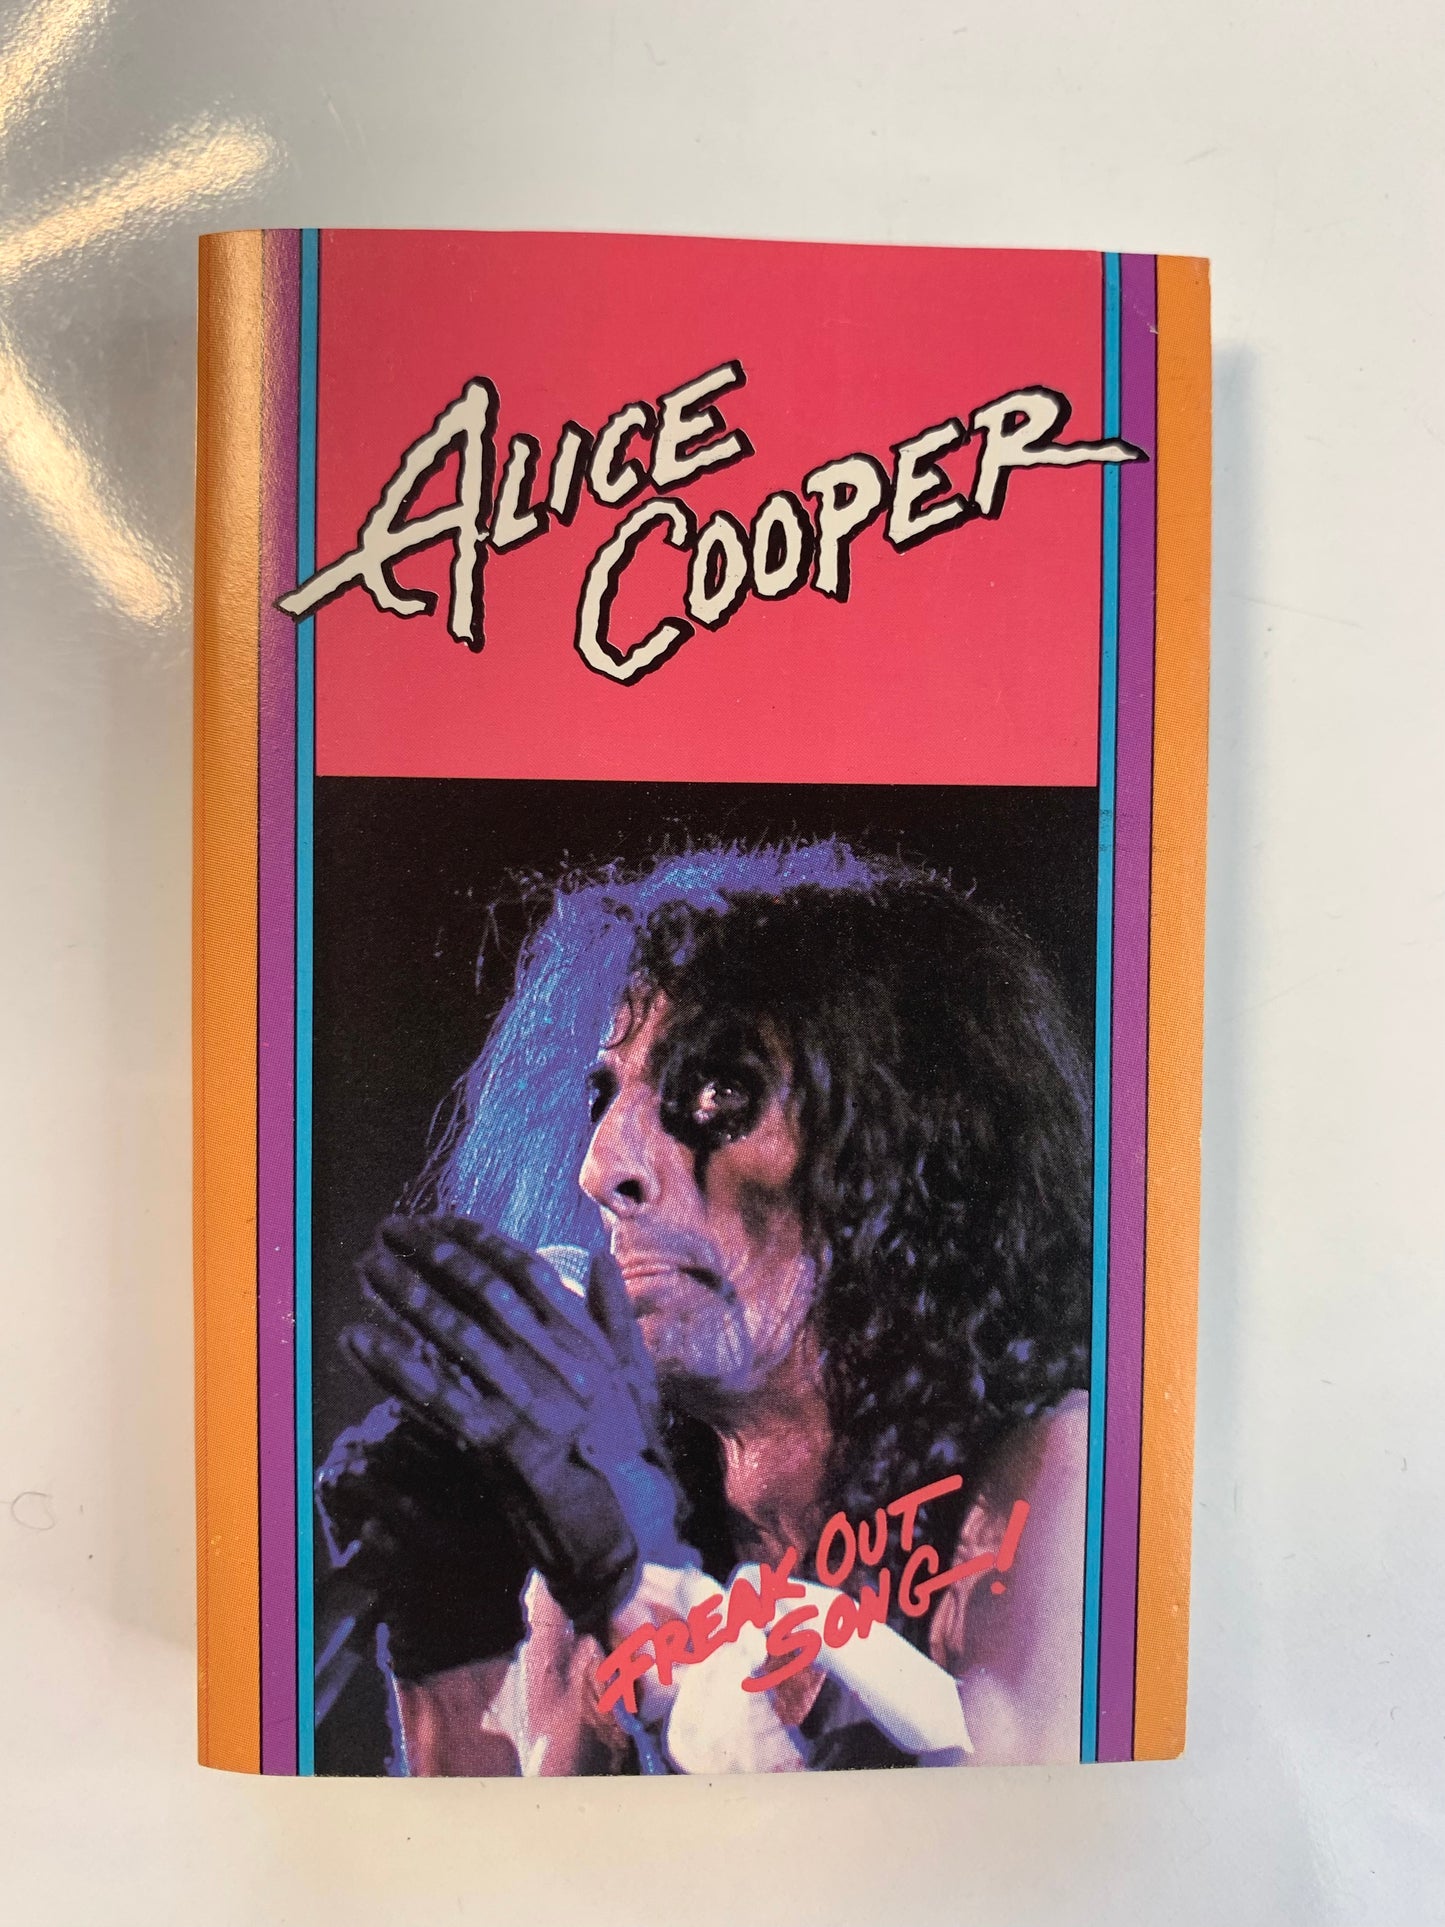 Alice Cooper, Freak Out Song!